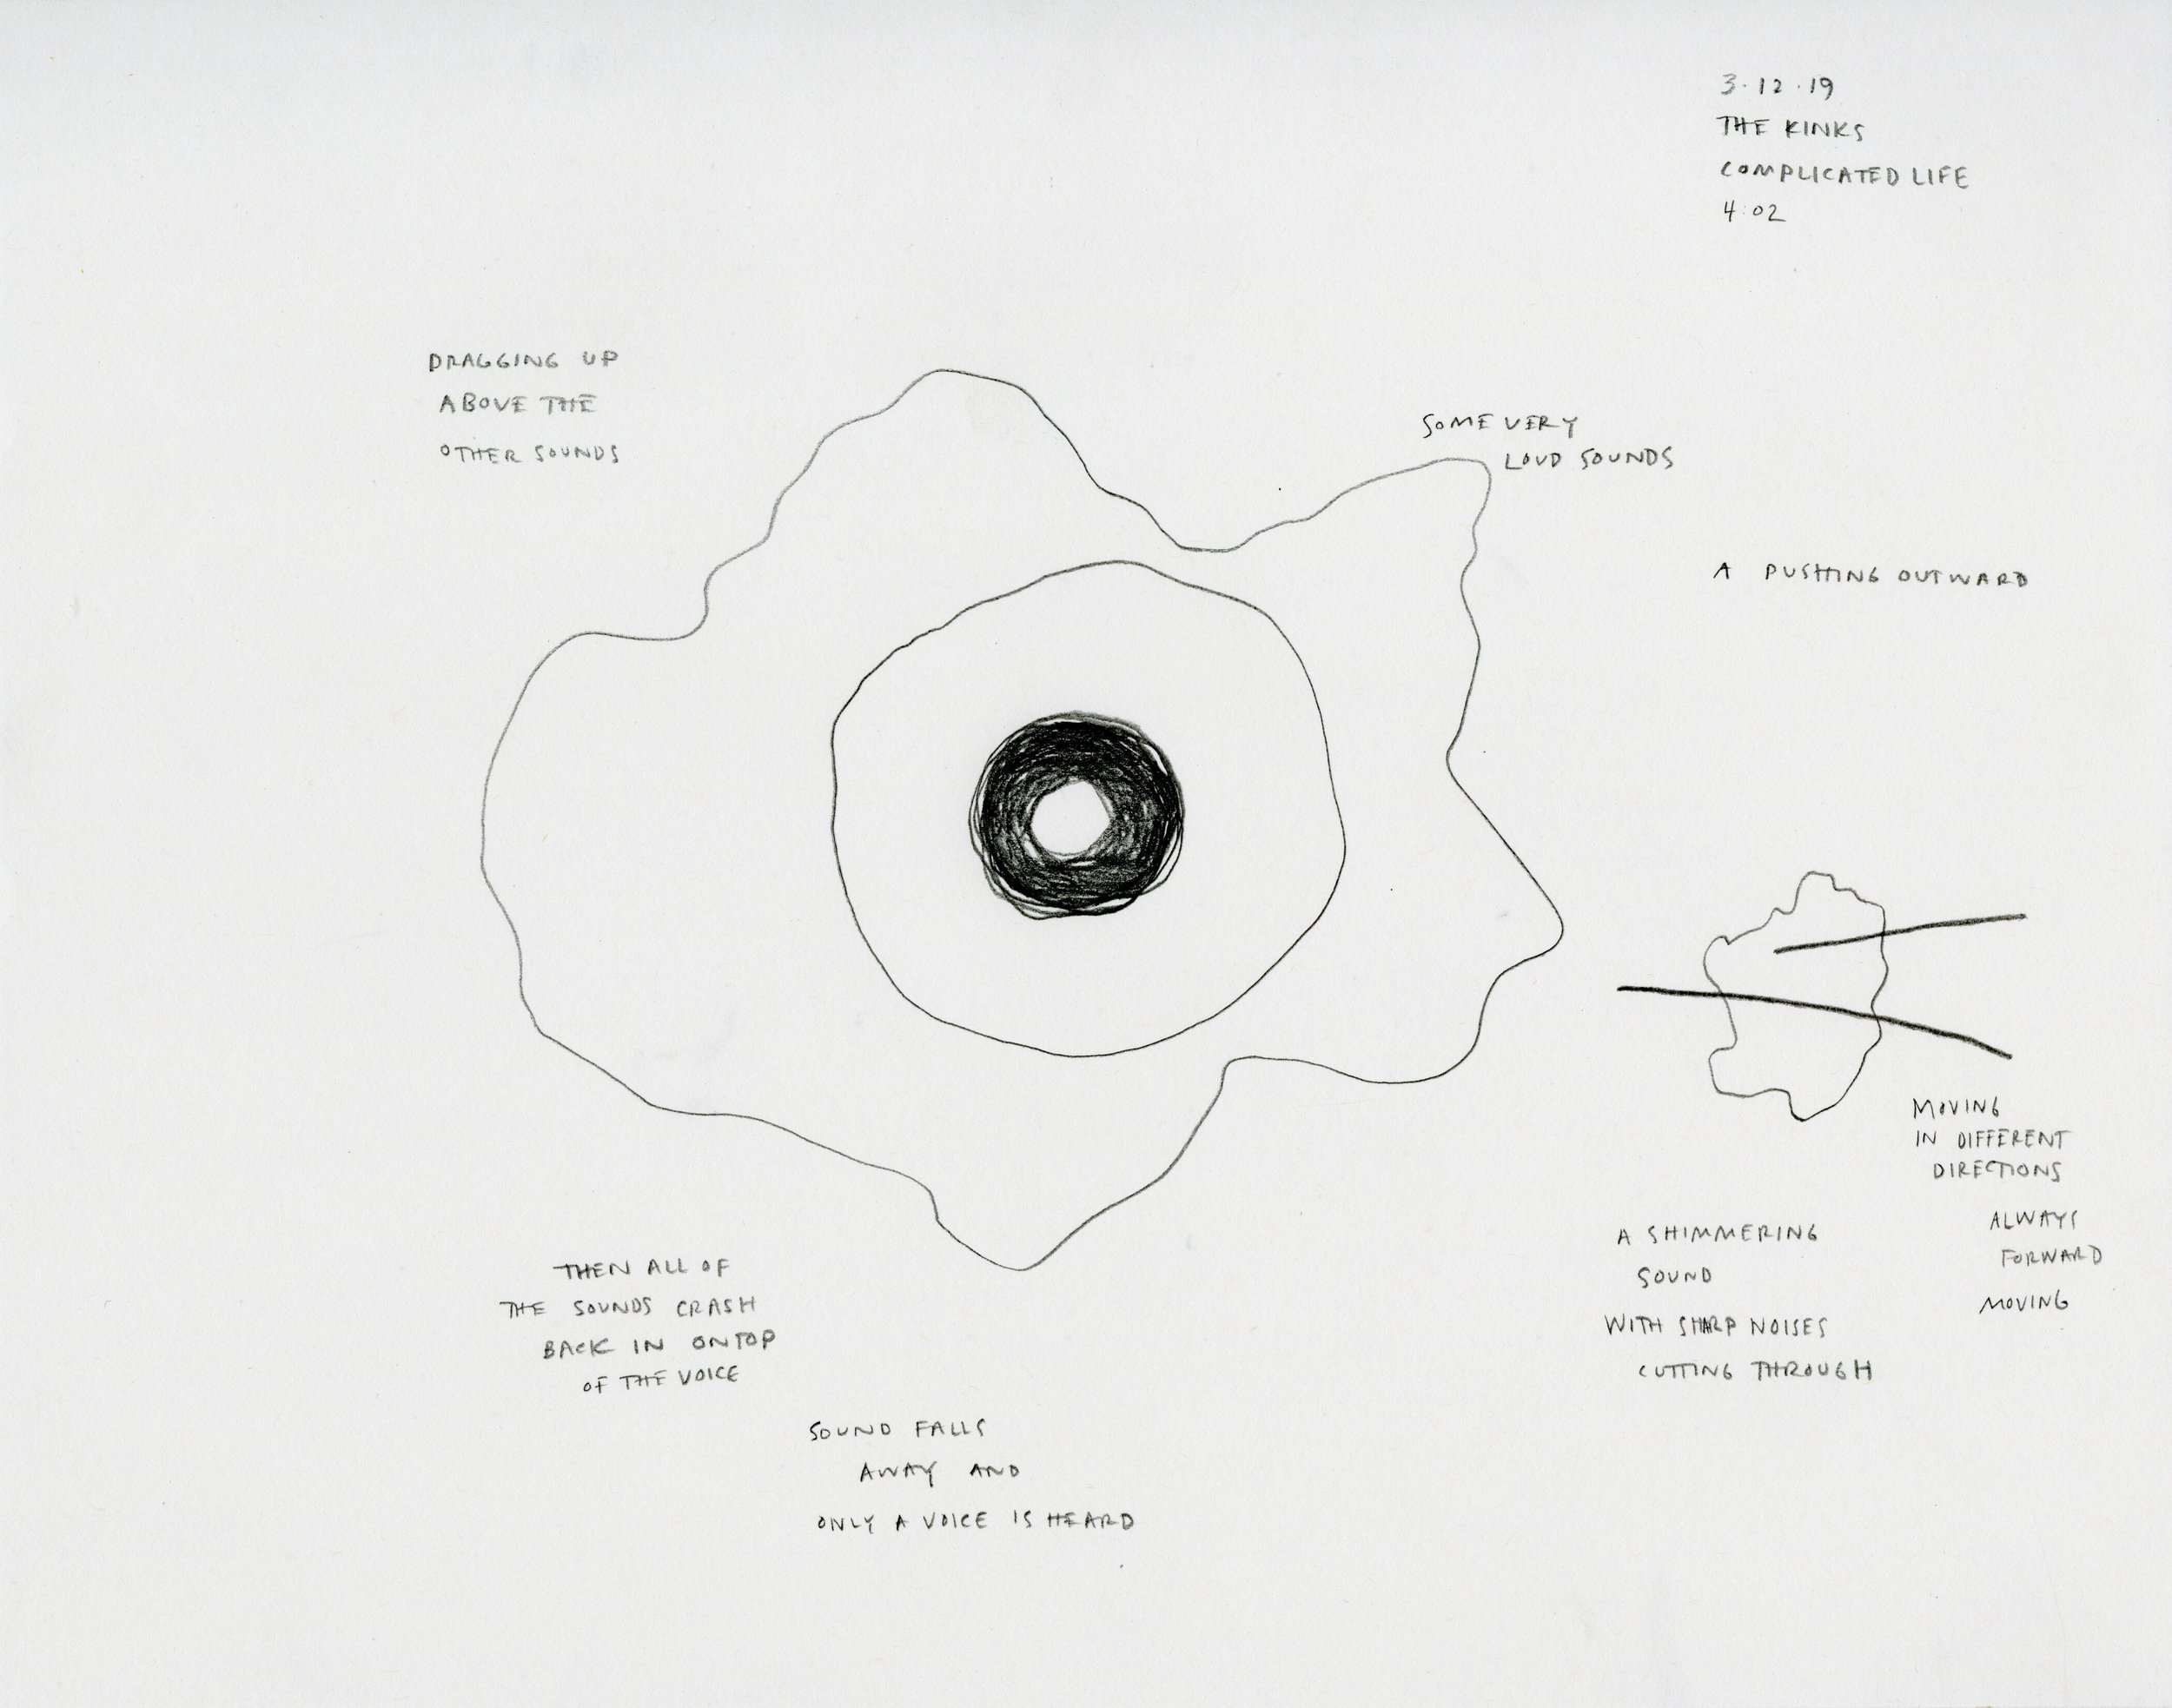   Music from Christopher, 2019   in collaboration with Christopher Jones  Cochlear Implant, youtube playlist, graphite, paper 